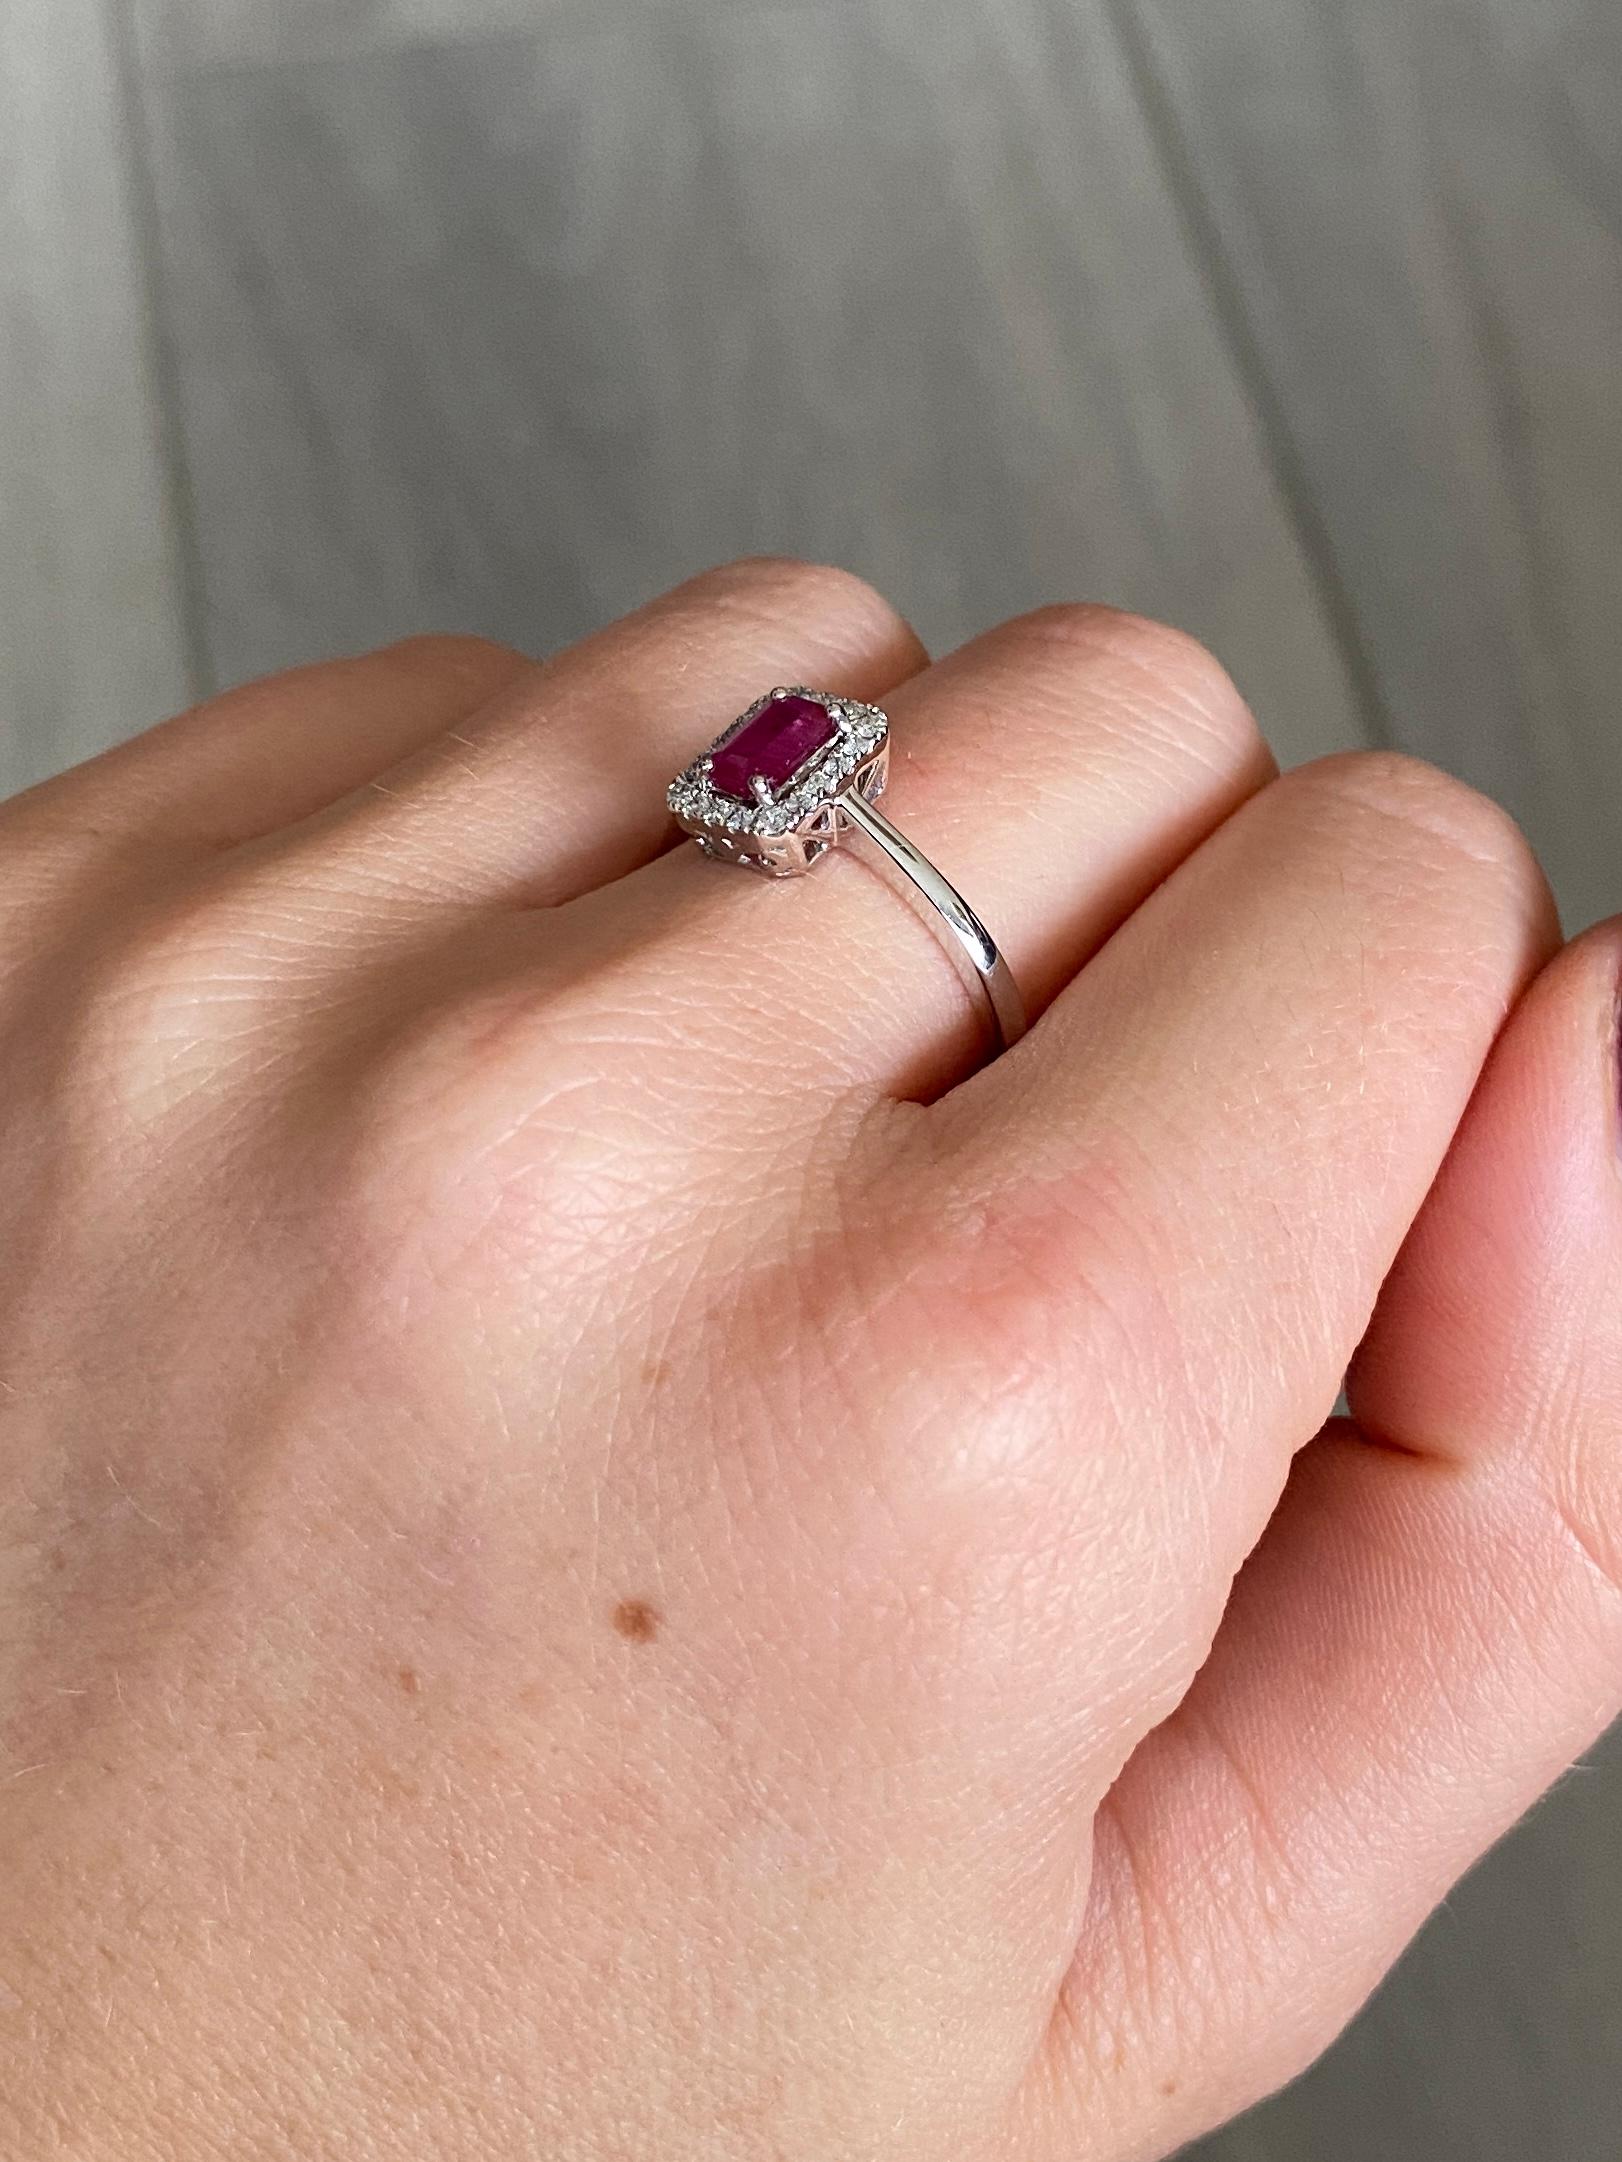 This stunning cluster holds a bright pink ruby at the centre measuring 20pts and around the outside is a halo of sparkling diamonds totalling approx 40pts. The ring is modelled in 18 carat white gold.

Ring Size: O or 7 1/4
Cluster Diameter: